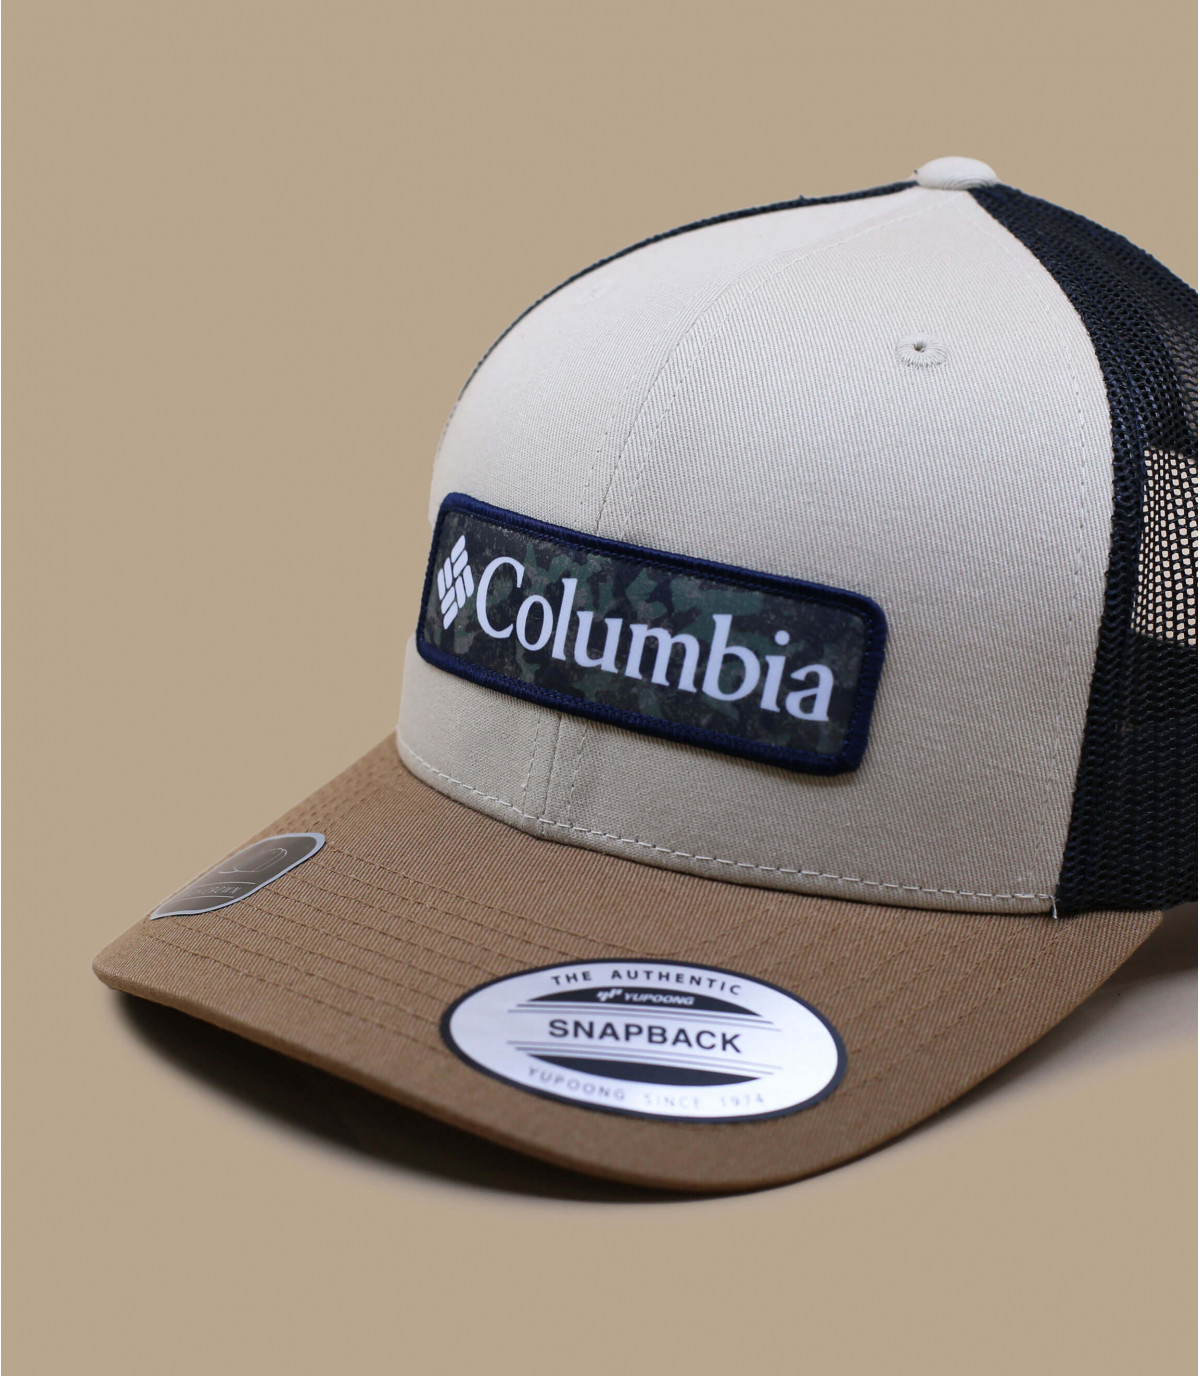 Trucker Camo Patch ancient fossil navy delta